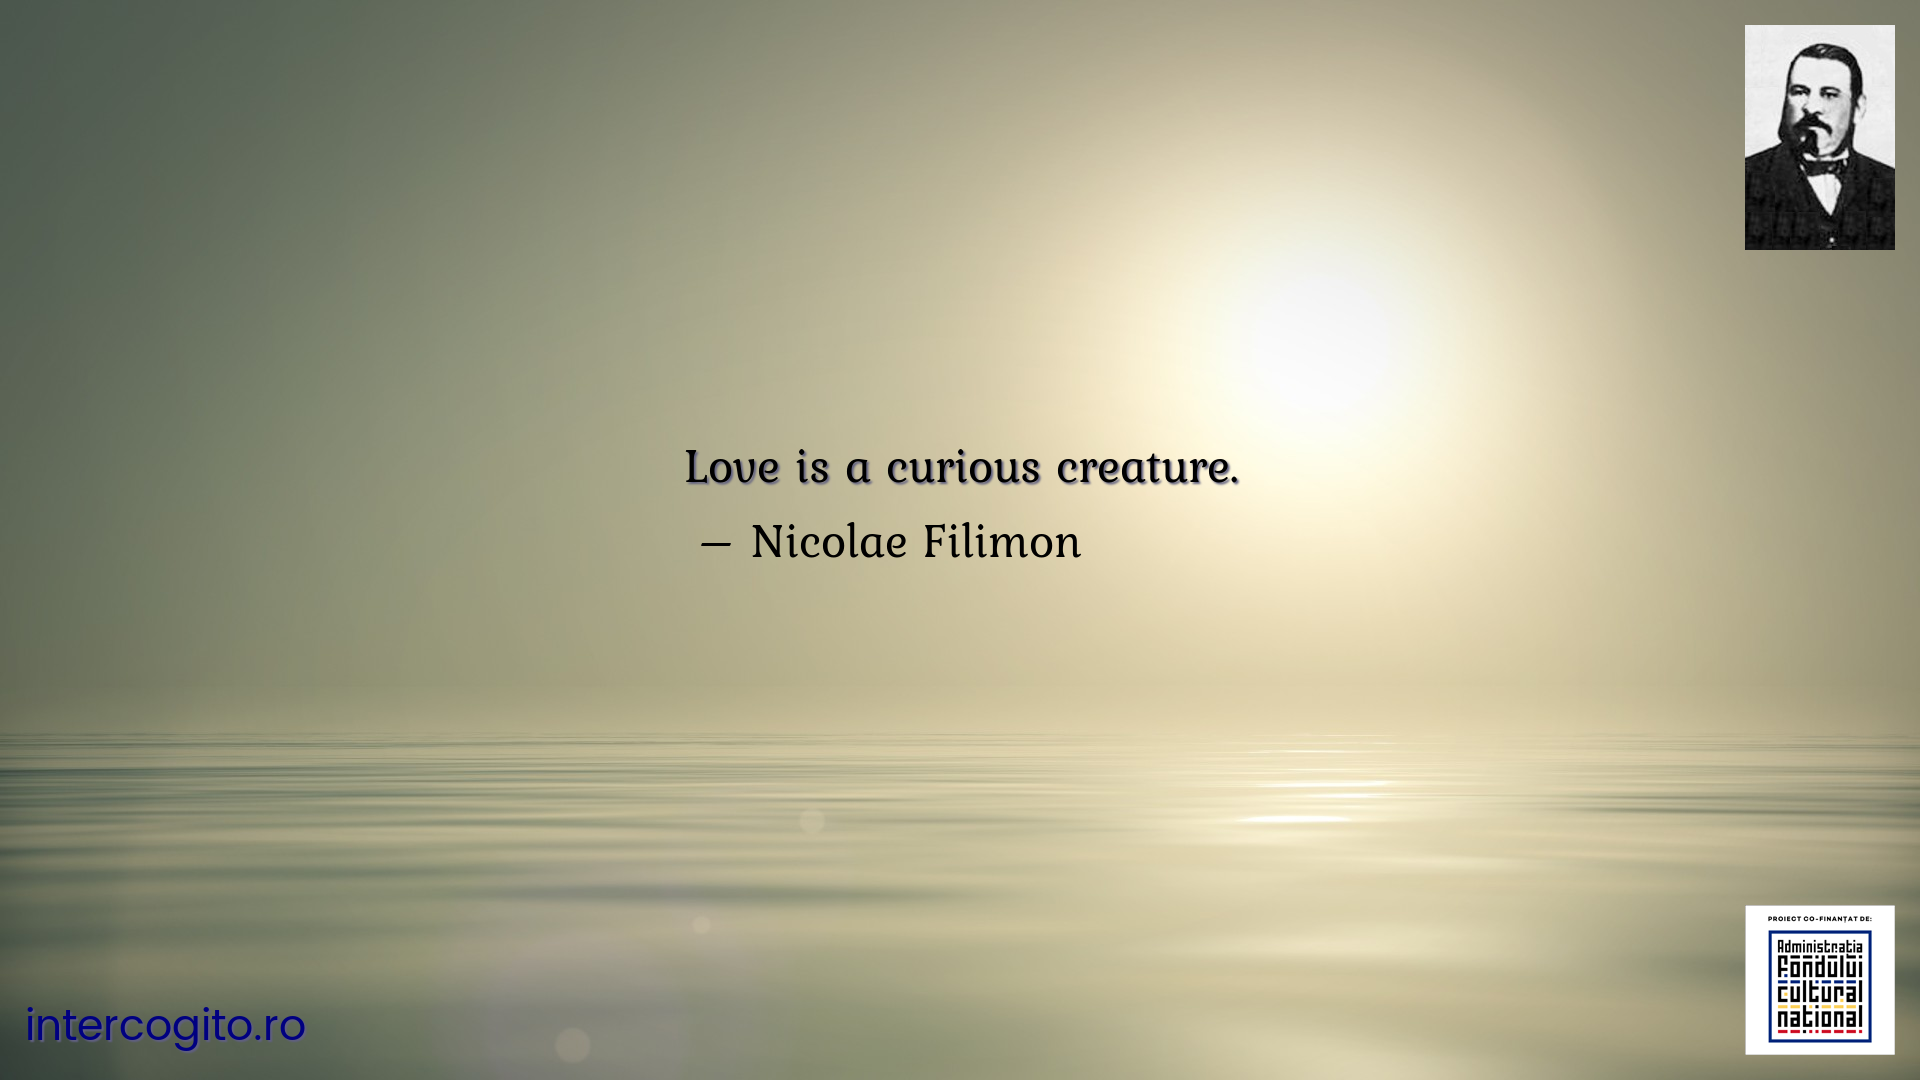 Love is a curious creature.